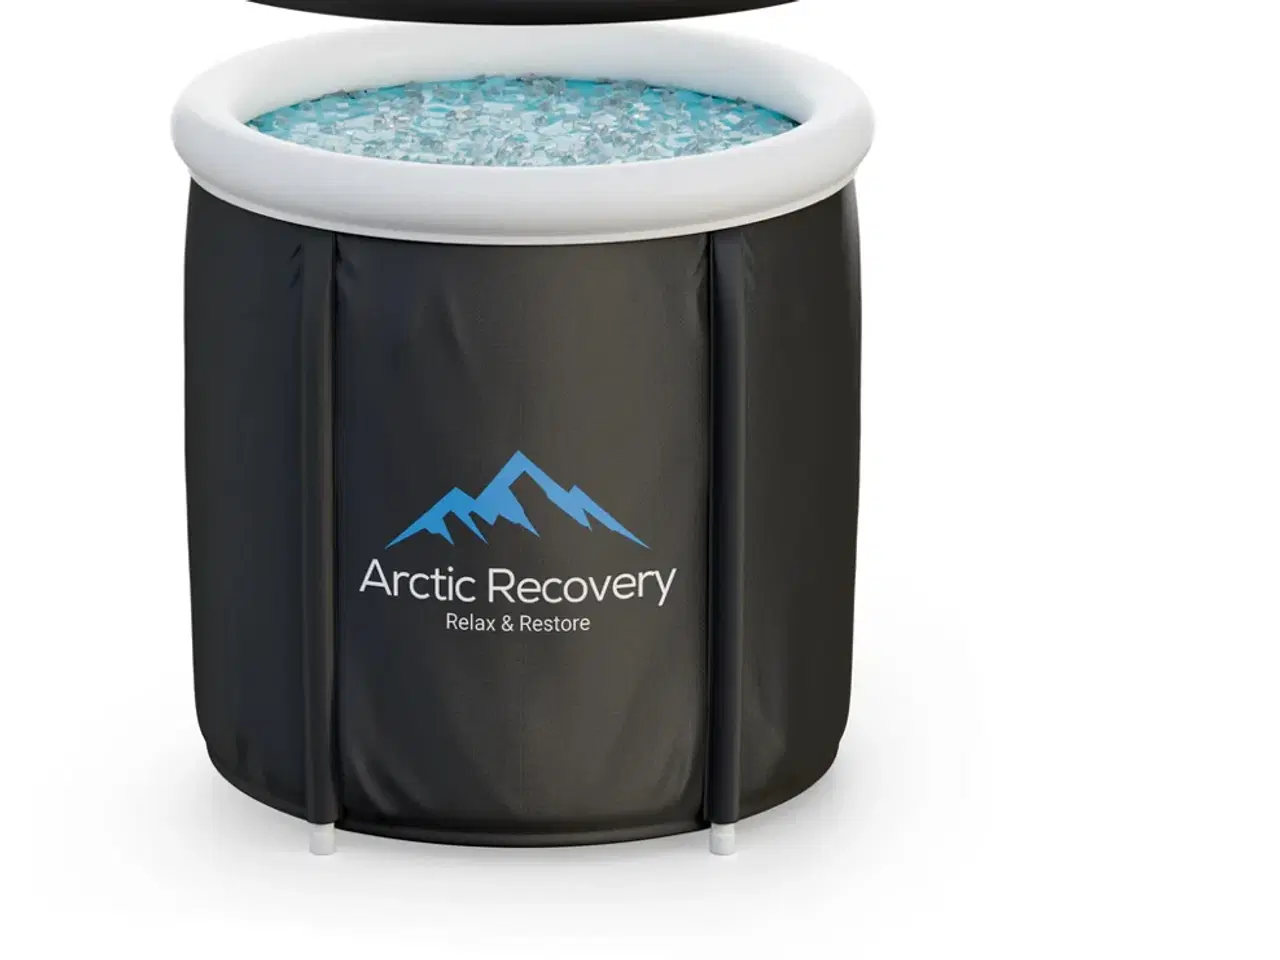 Billede 3 - Isbad fra arctic recovery 